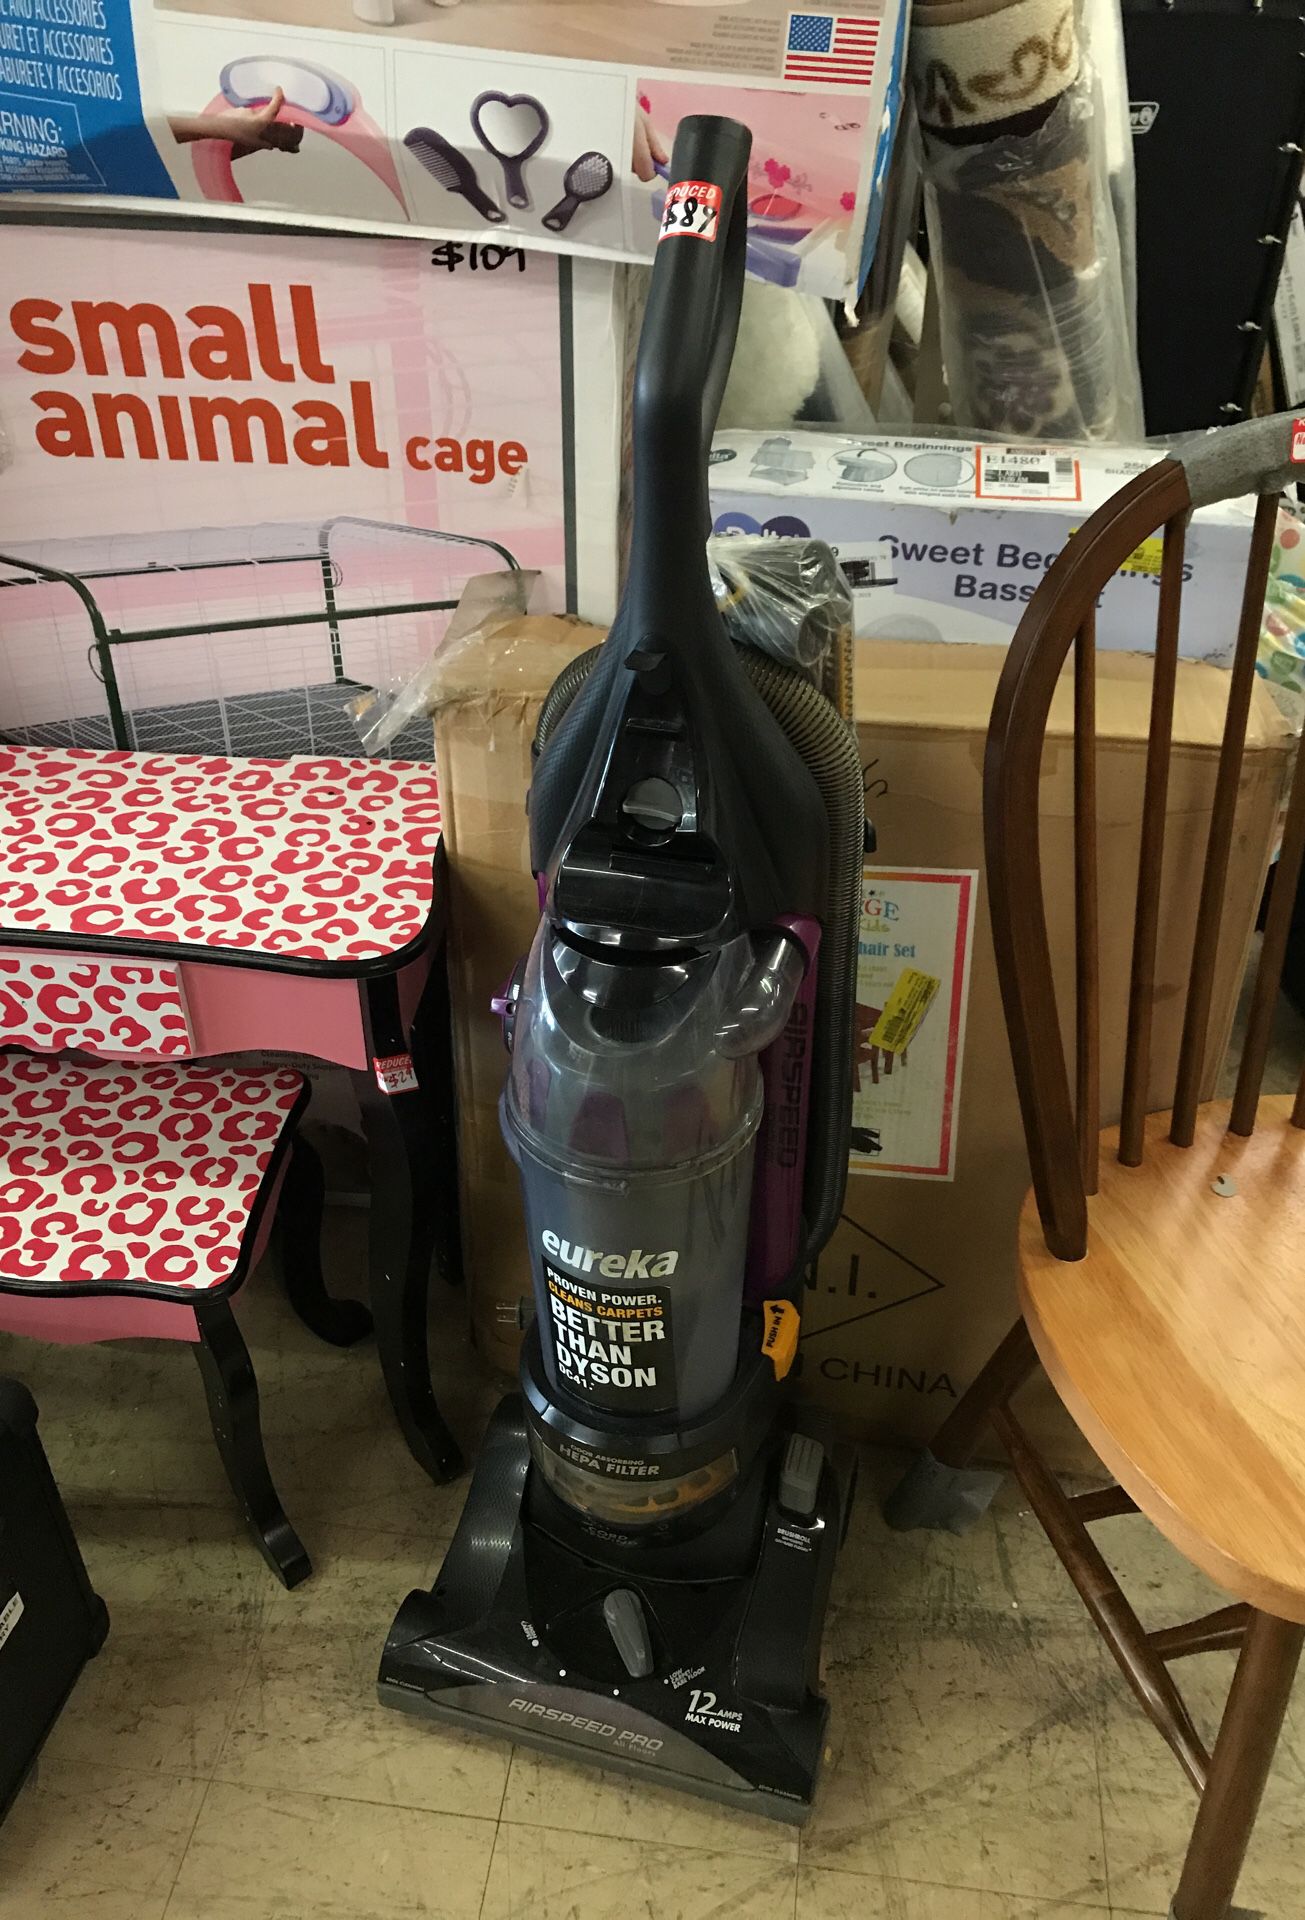 Used Vacuum. “Better than Dyson”